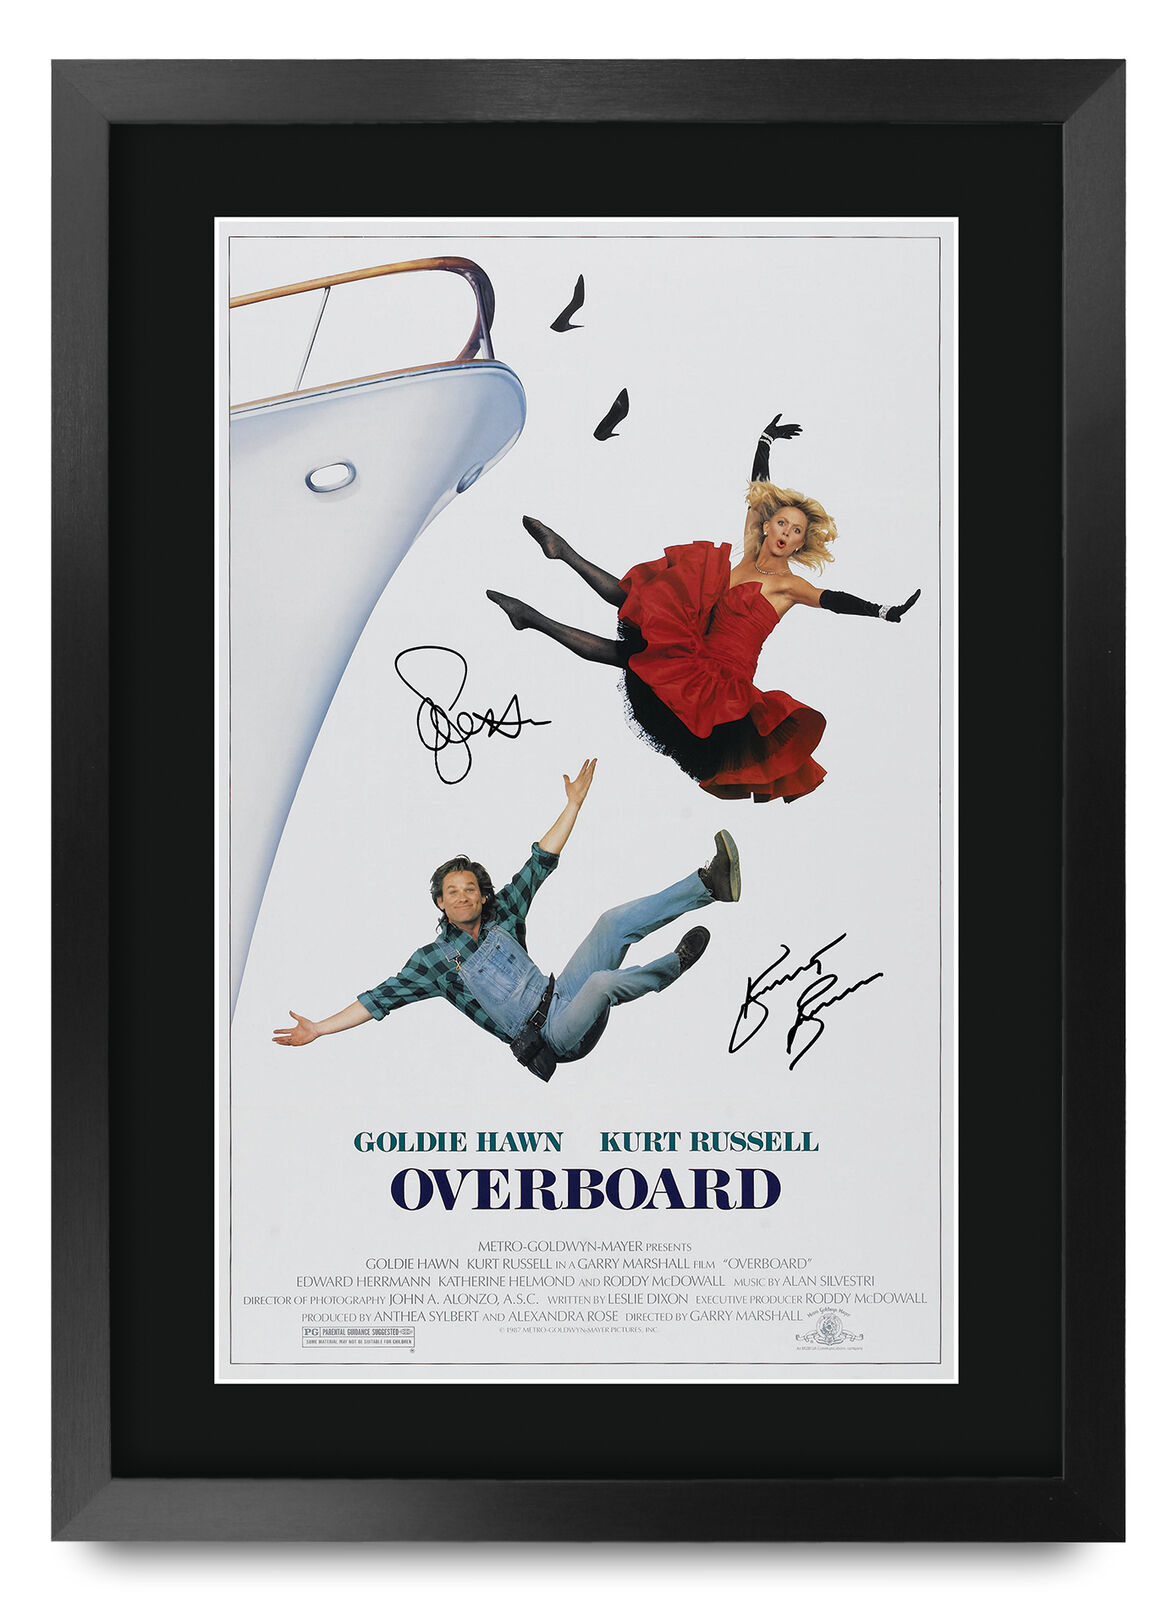 Overboard A3 Framed Goldie Hawn, Kurt Russell Poster Signed Print for Movie Fans